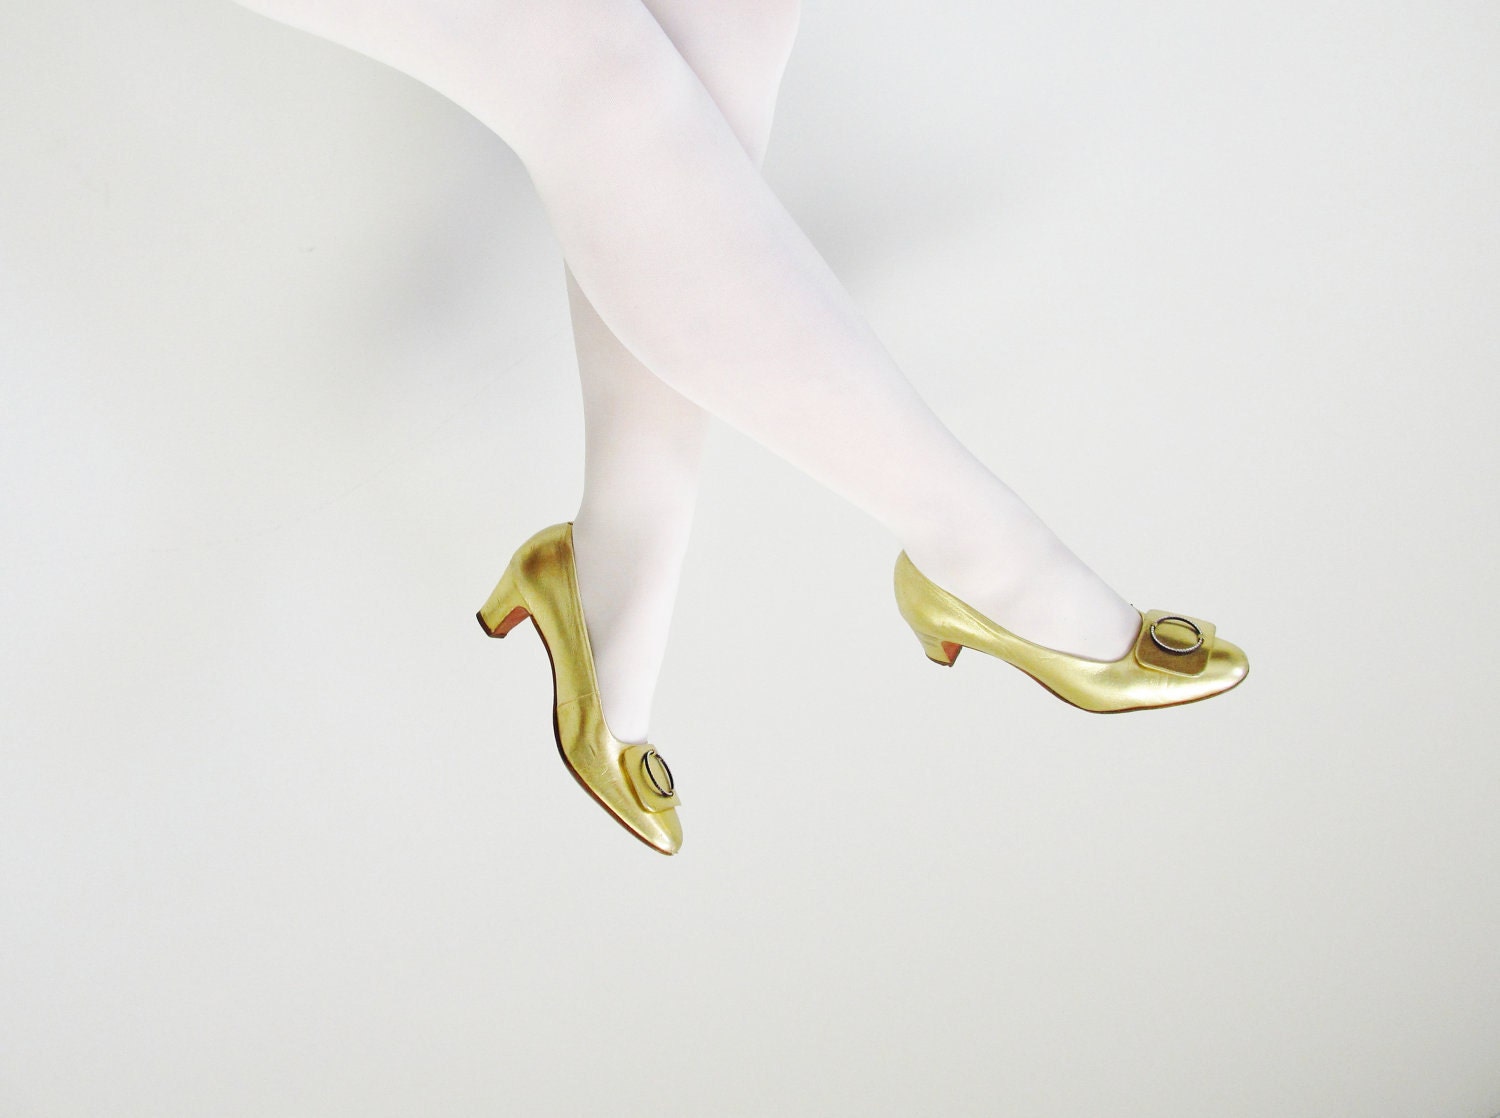 1960s Gold Pumps with Rhinestone Buckles  / Serenades by Florsheim / Metallic Gold Heels / Size 7 - CoyoteMarmalade